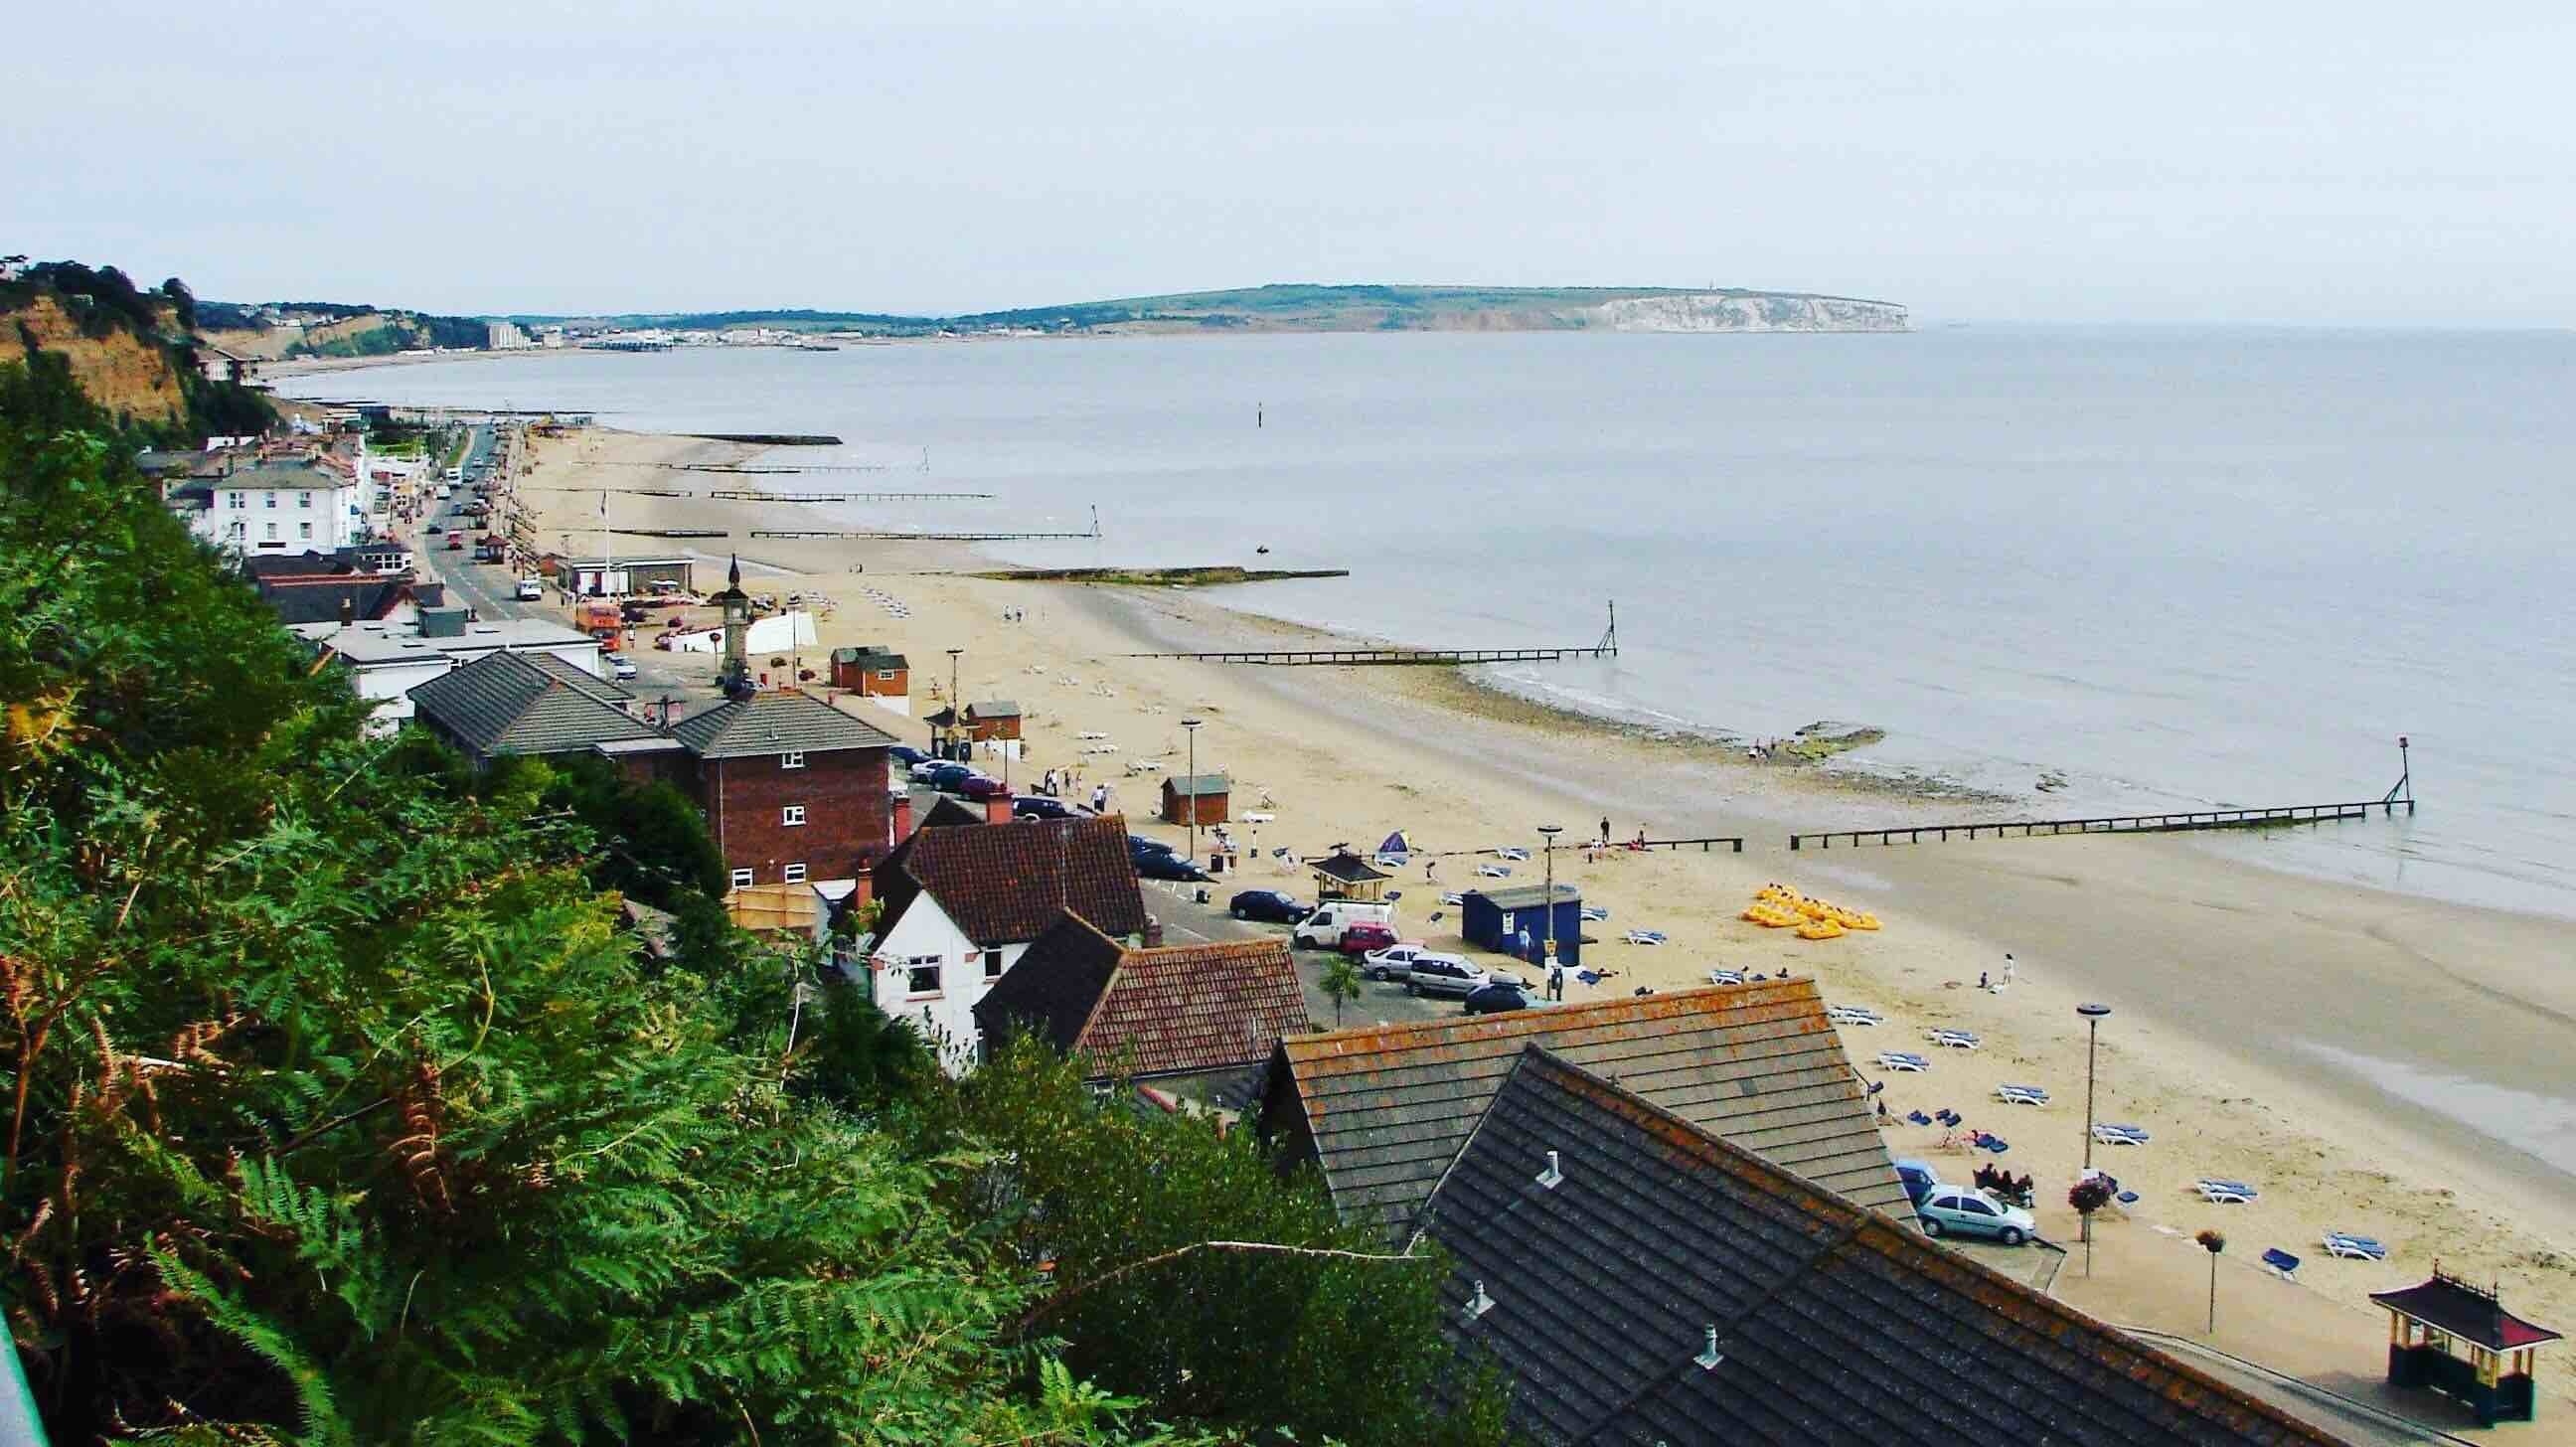 #lksawaydays on the #isleofwight spent some time at the very pleasant Shanklin